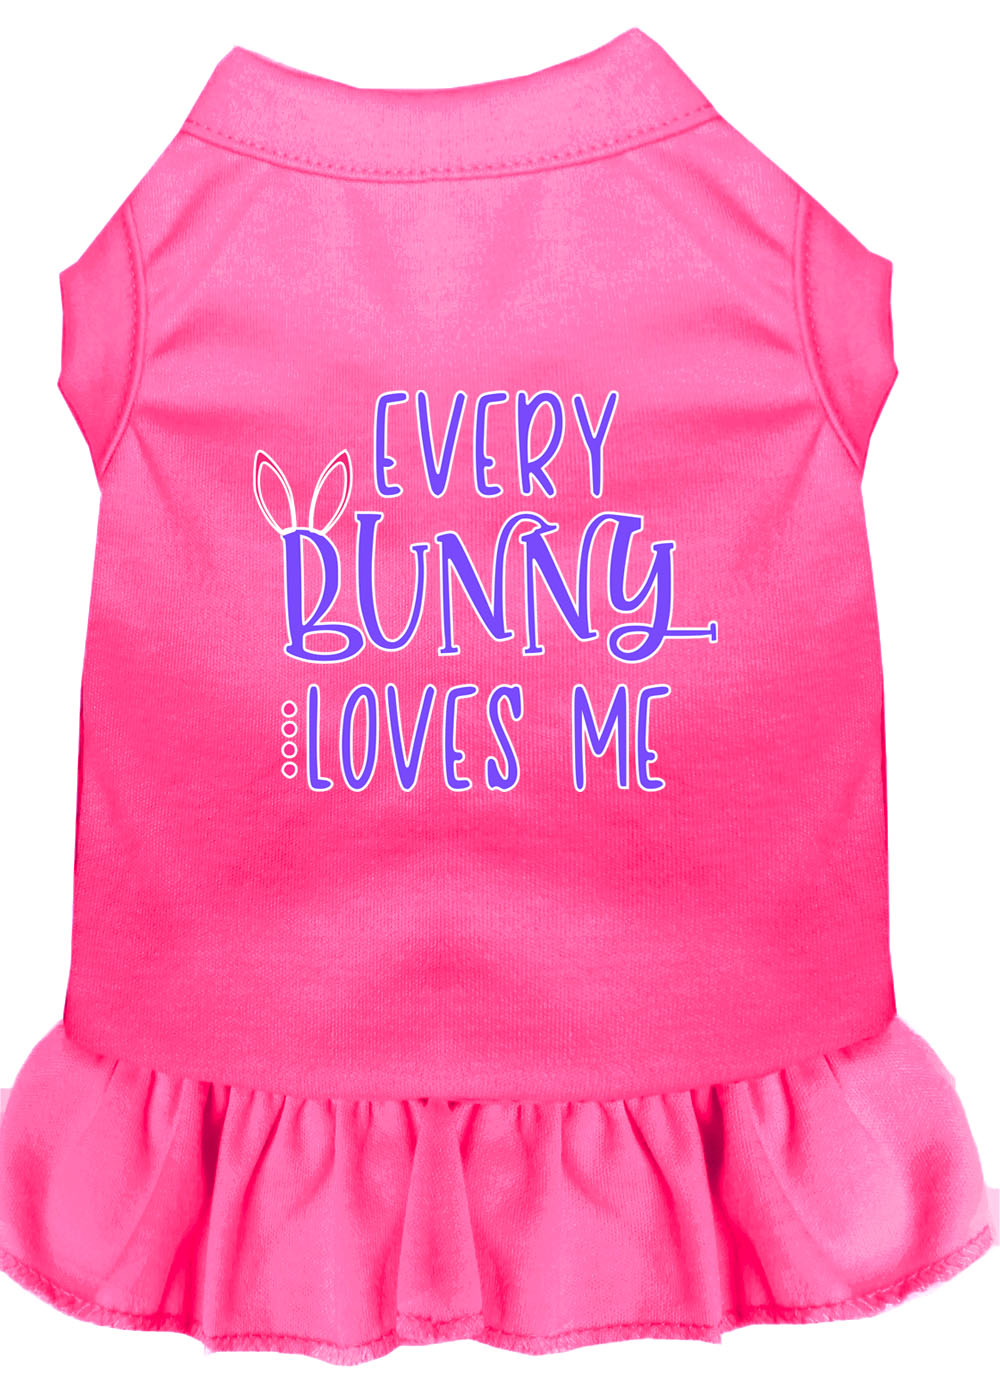 Every Bunny Loves me Screen Print Dog Dress Bright Pink Sm